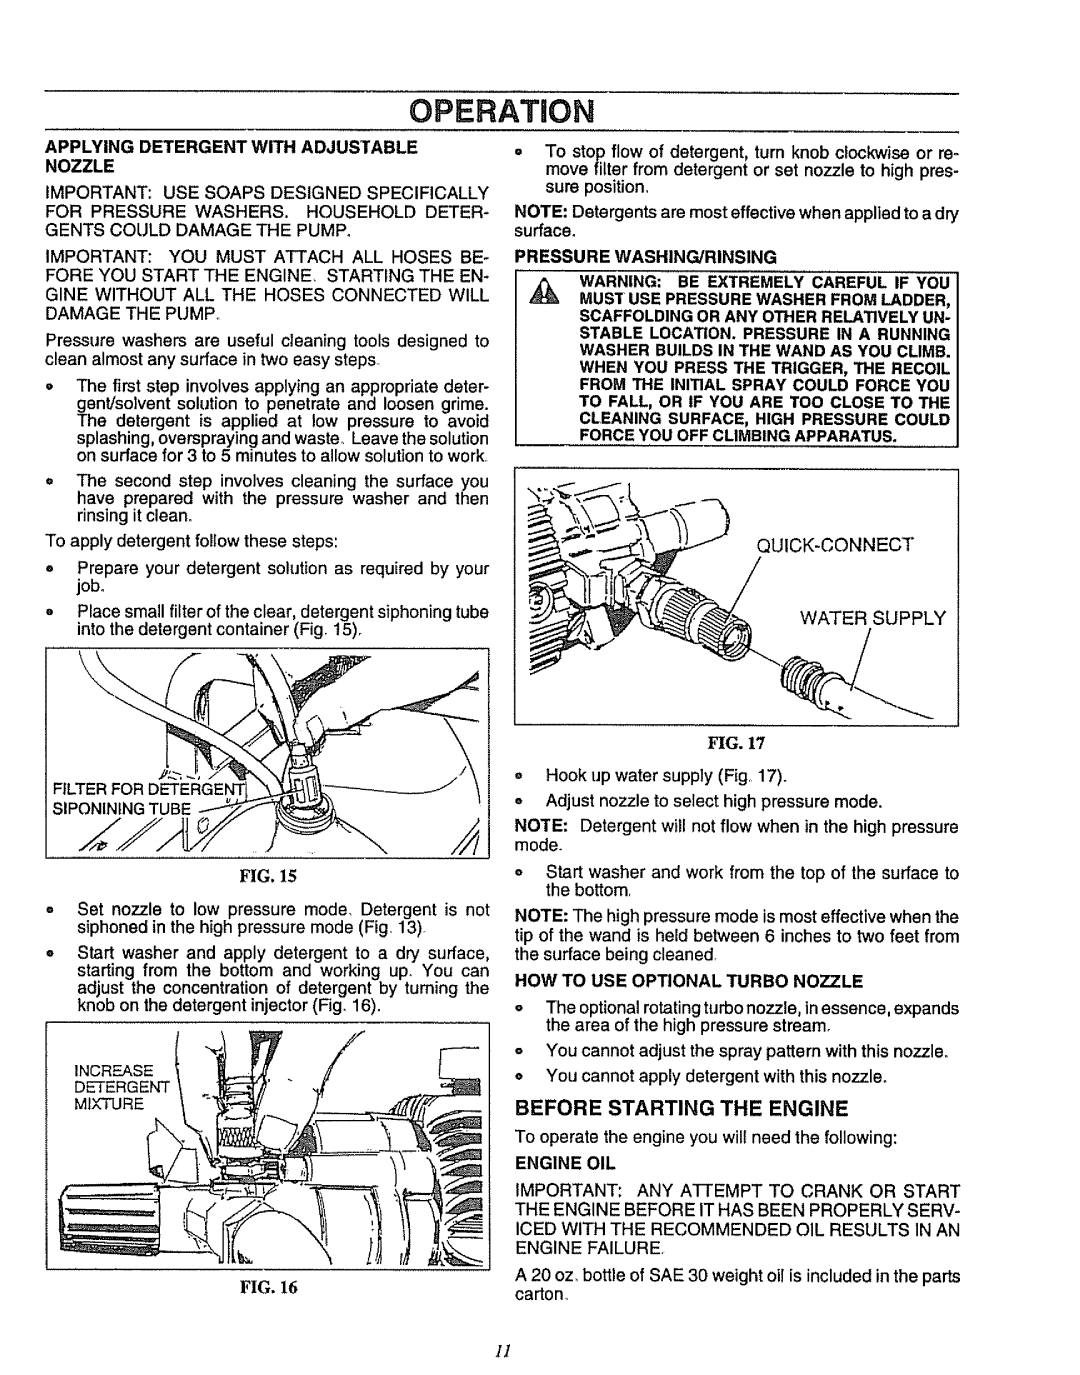 Craftsman 580.751781 owner manual Operation, Applying Detergent With Adjustable Nozzle 